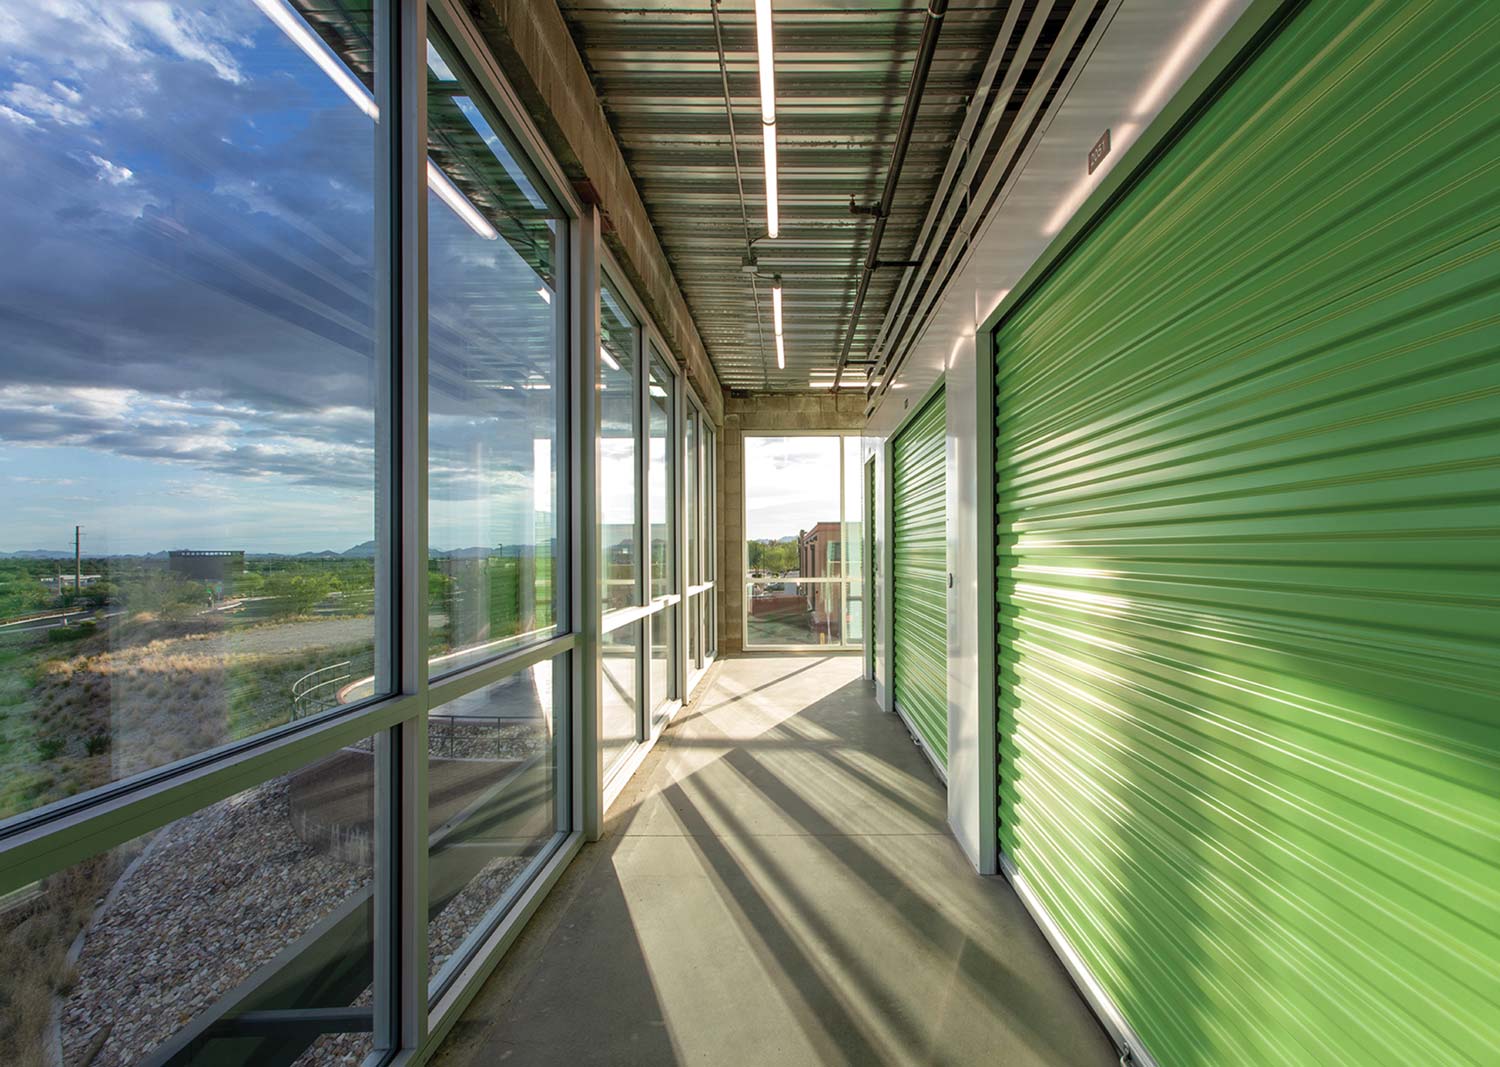 hallway of a storage facility with green doors